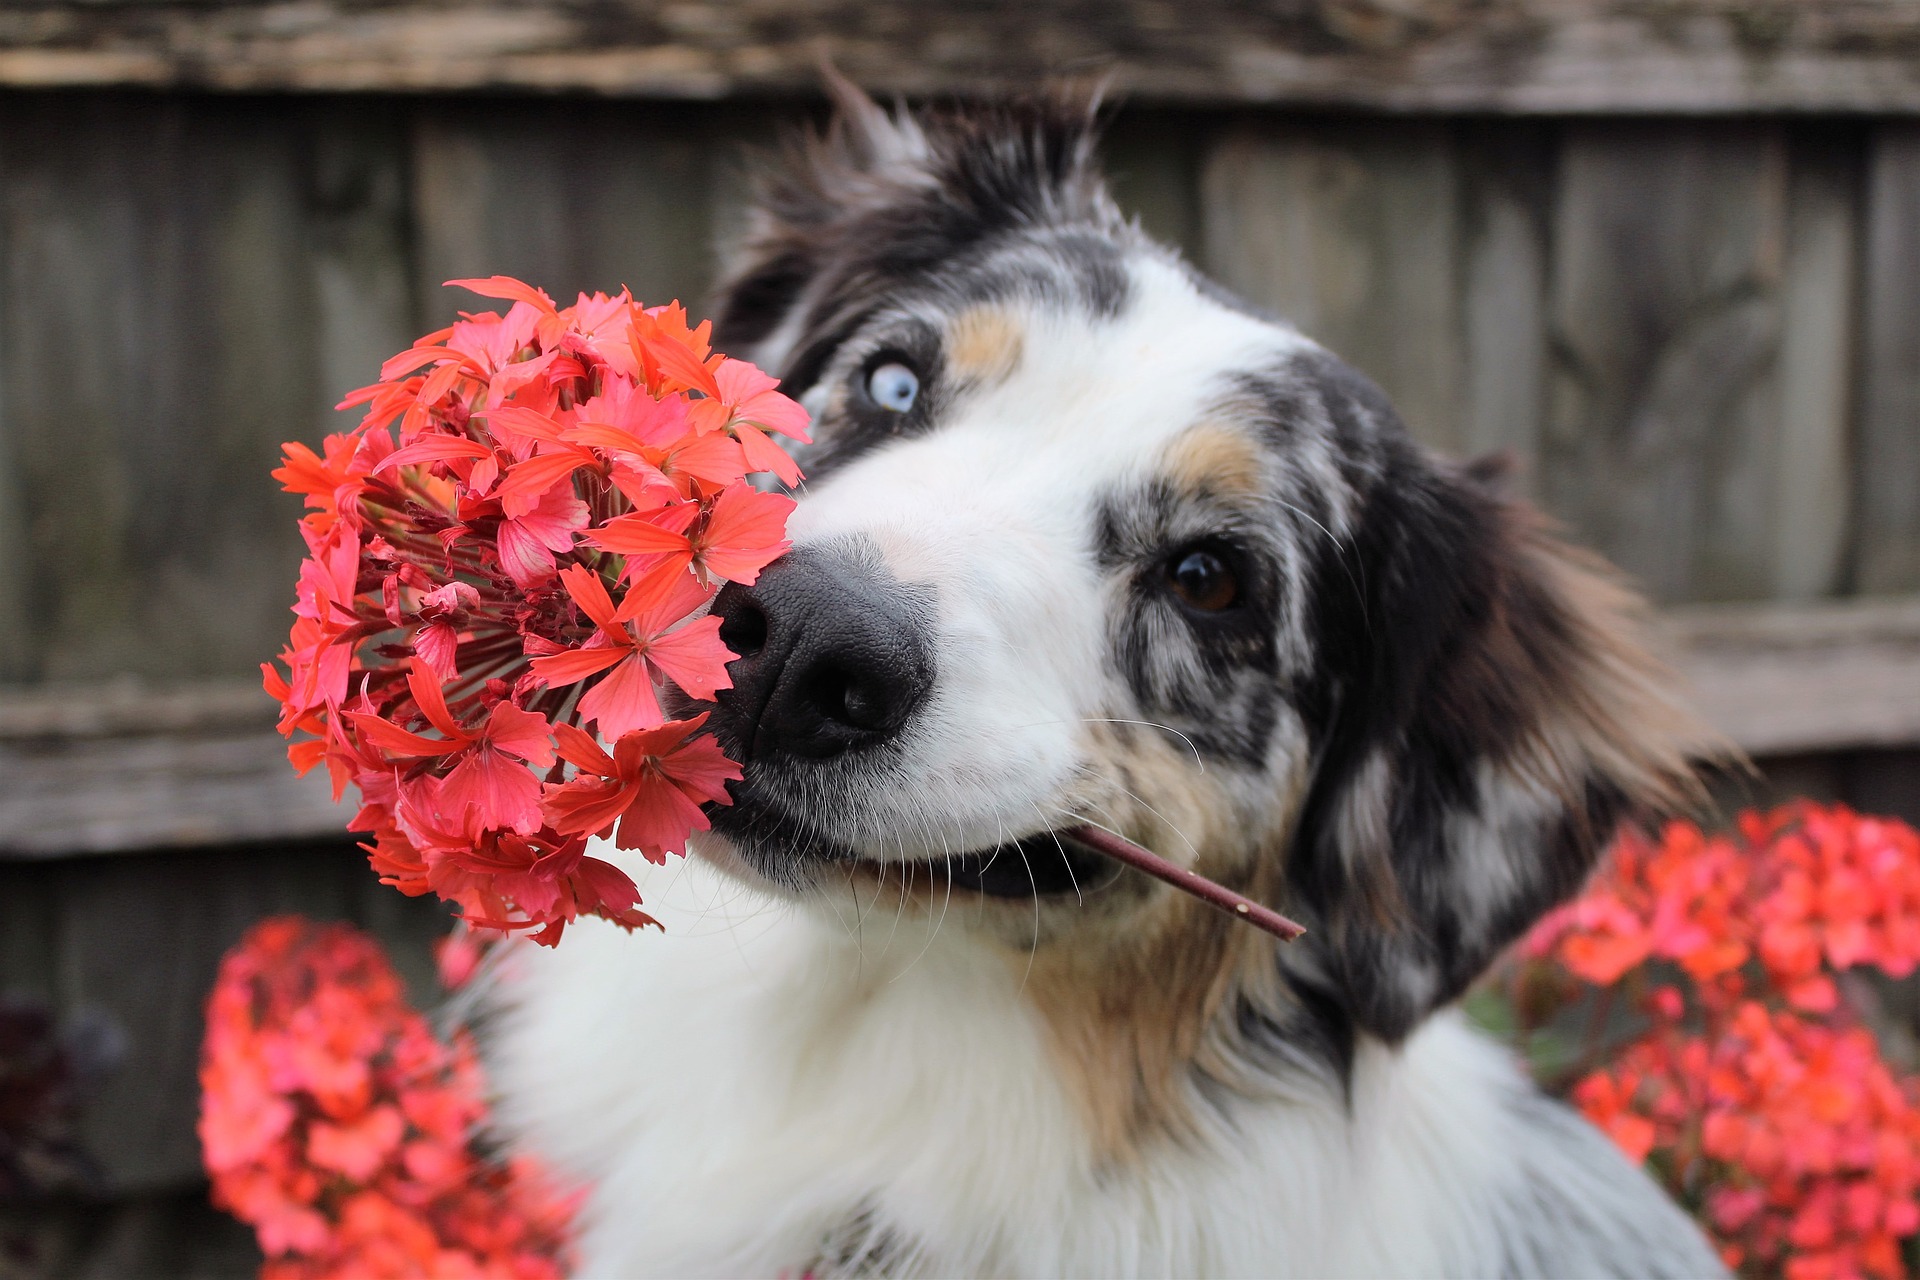 Pup with flower